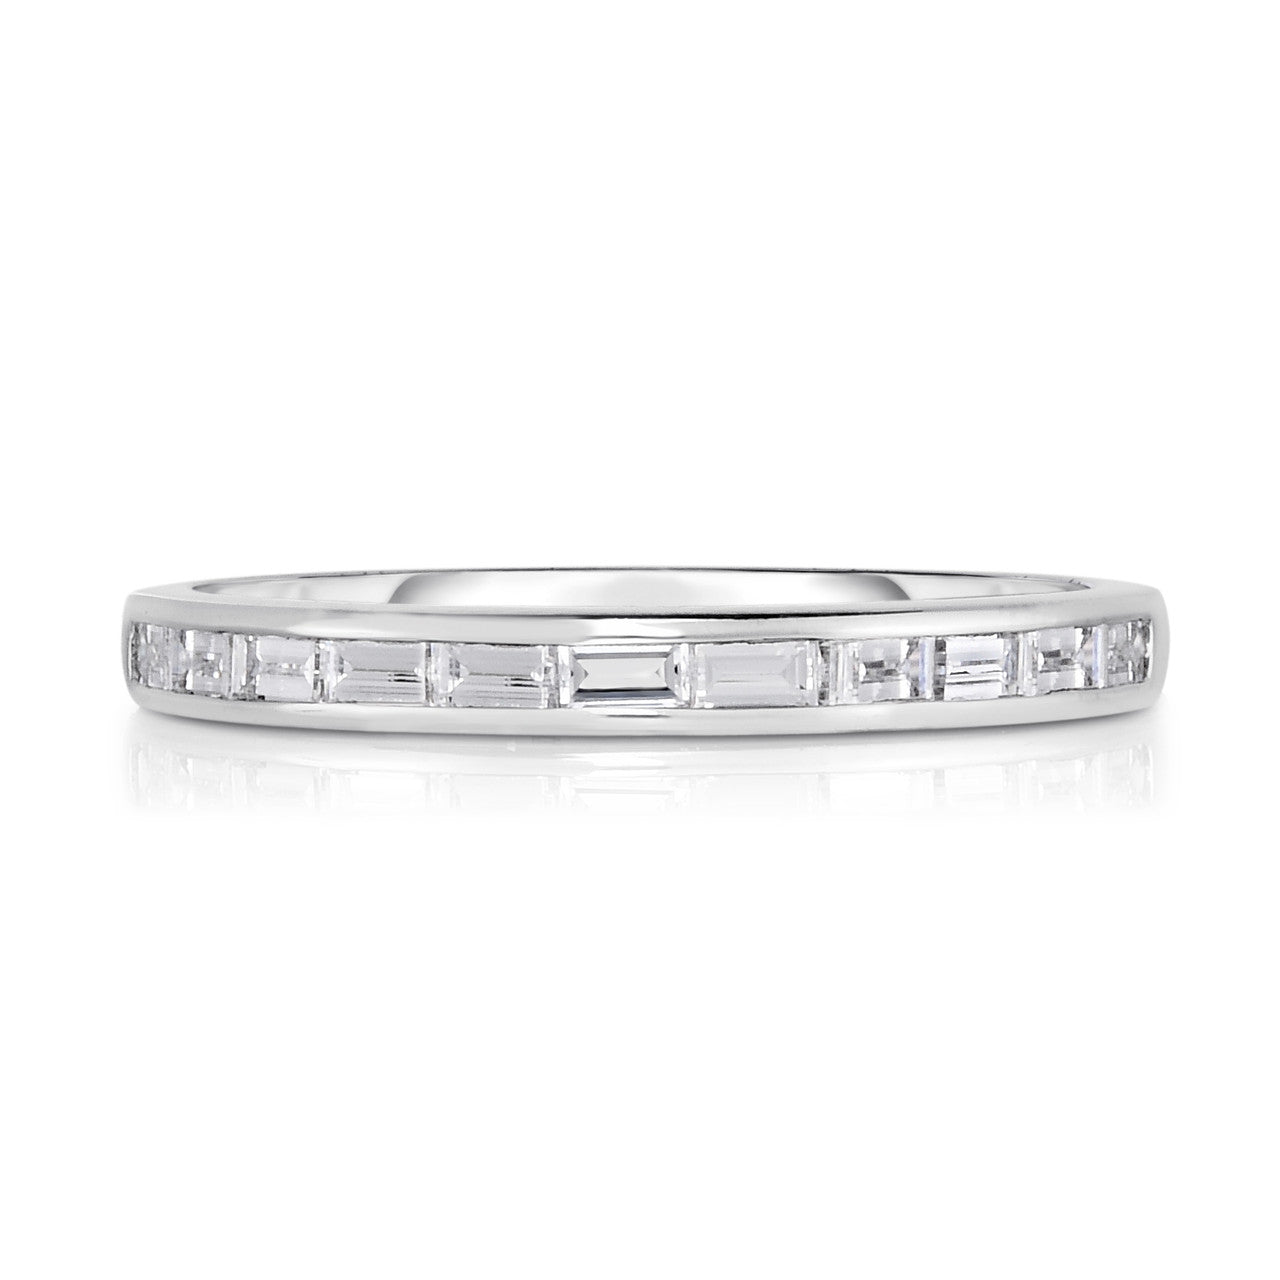 Channel Set Baguette Diamond Ring in White Gold